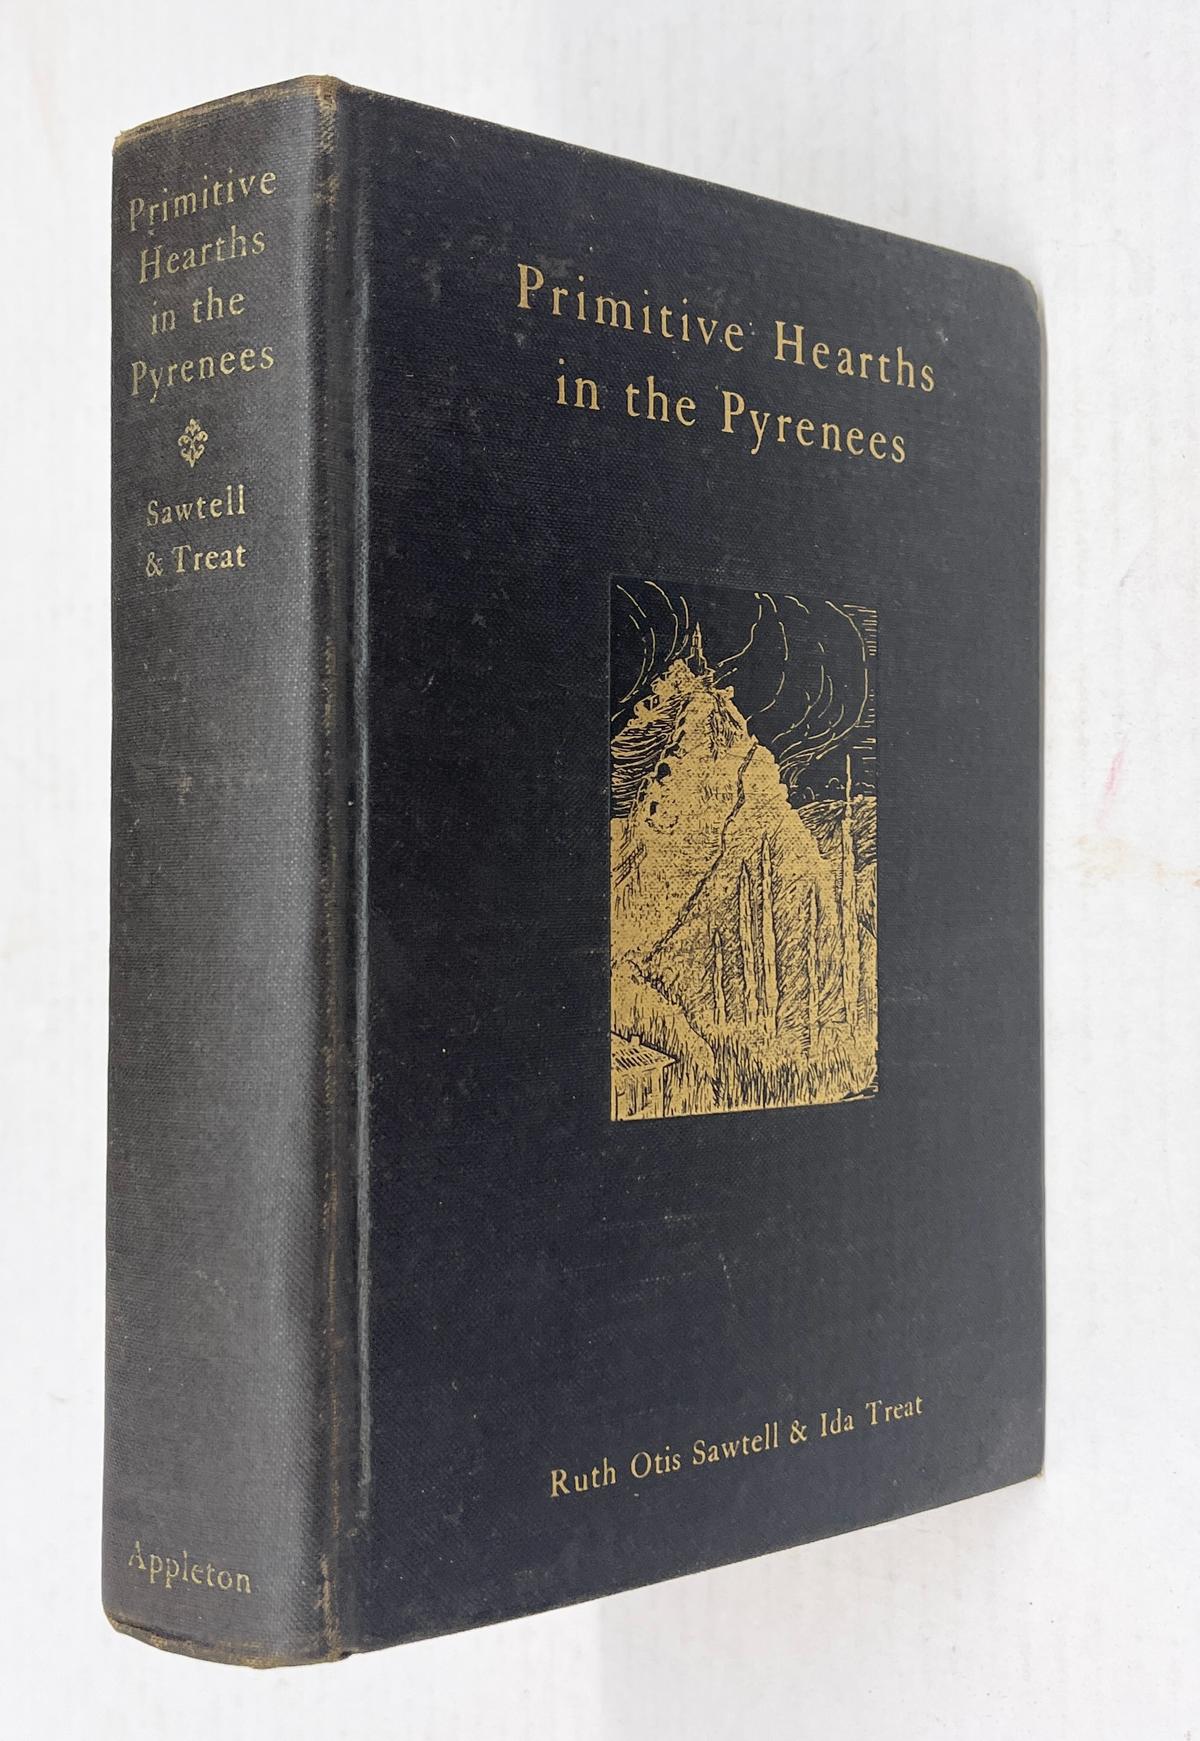 Primitive Hearths in the Pyrenees: Summer's Exporation in the Haunts of Prehistoric Man (1927)